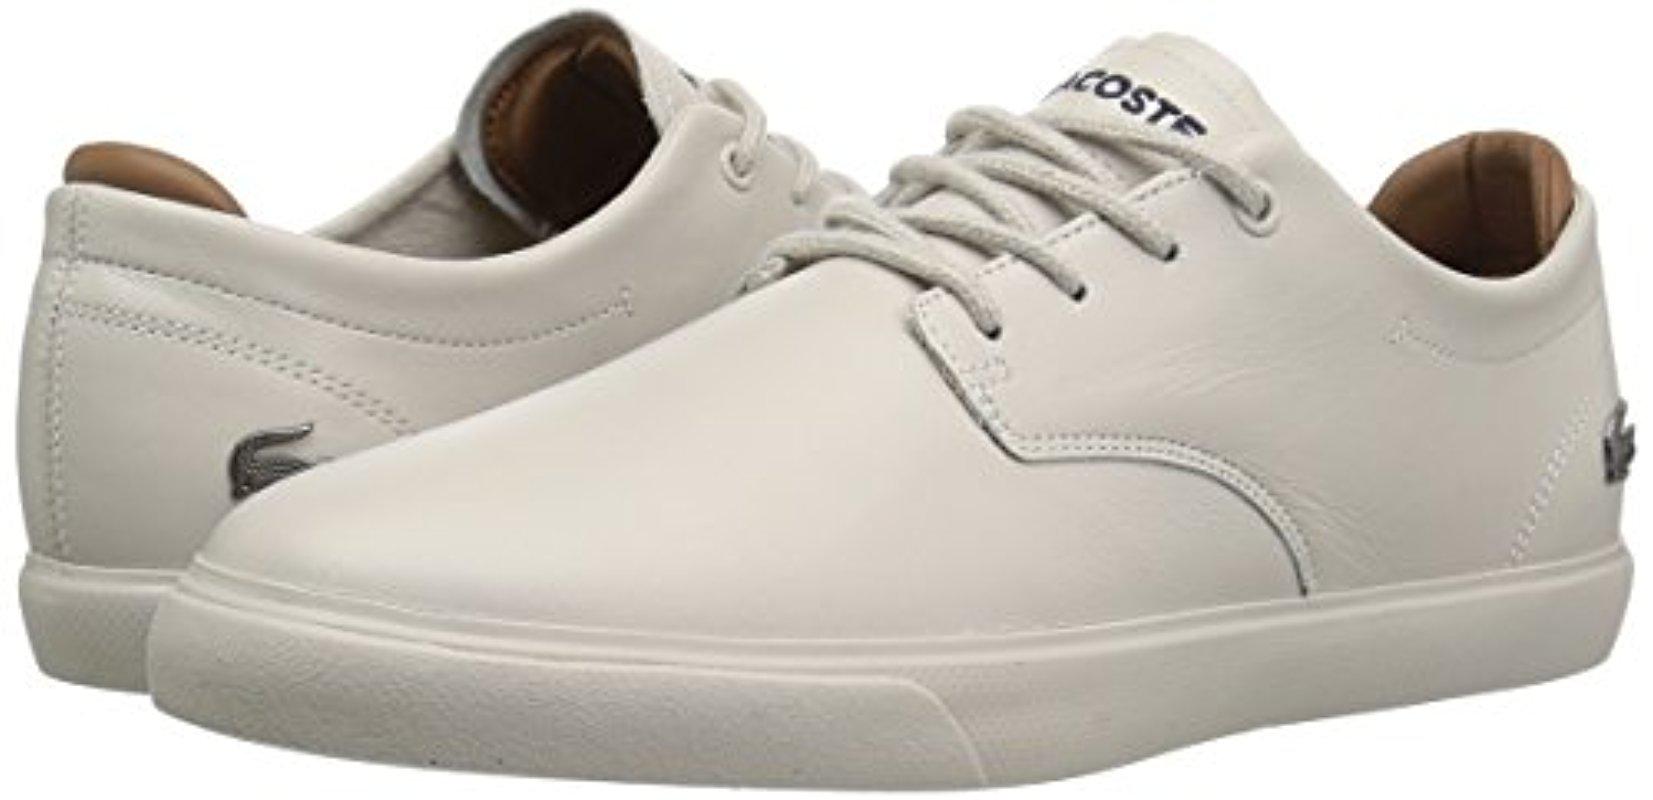 Lacoste Leather Espere 317 1 Bass 